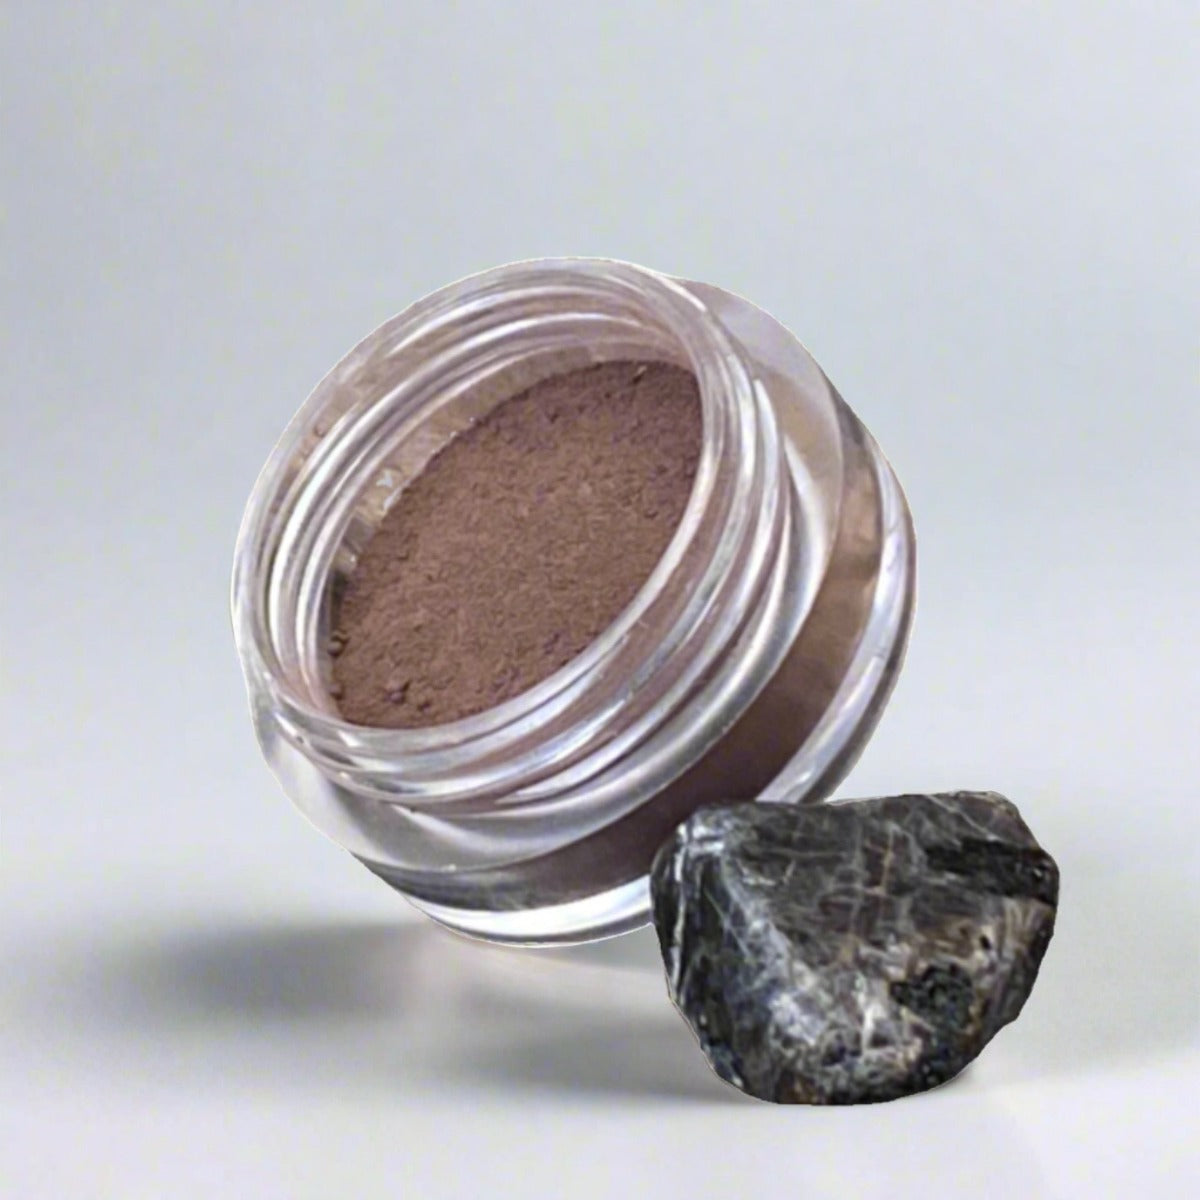 Cosmetic jar of dark brown loose powder brow filler, displaying its color and texture